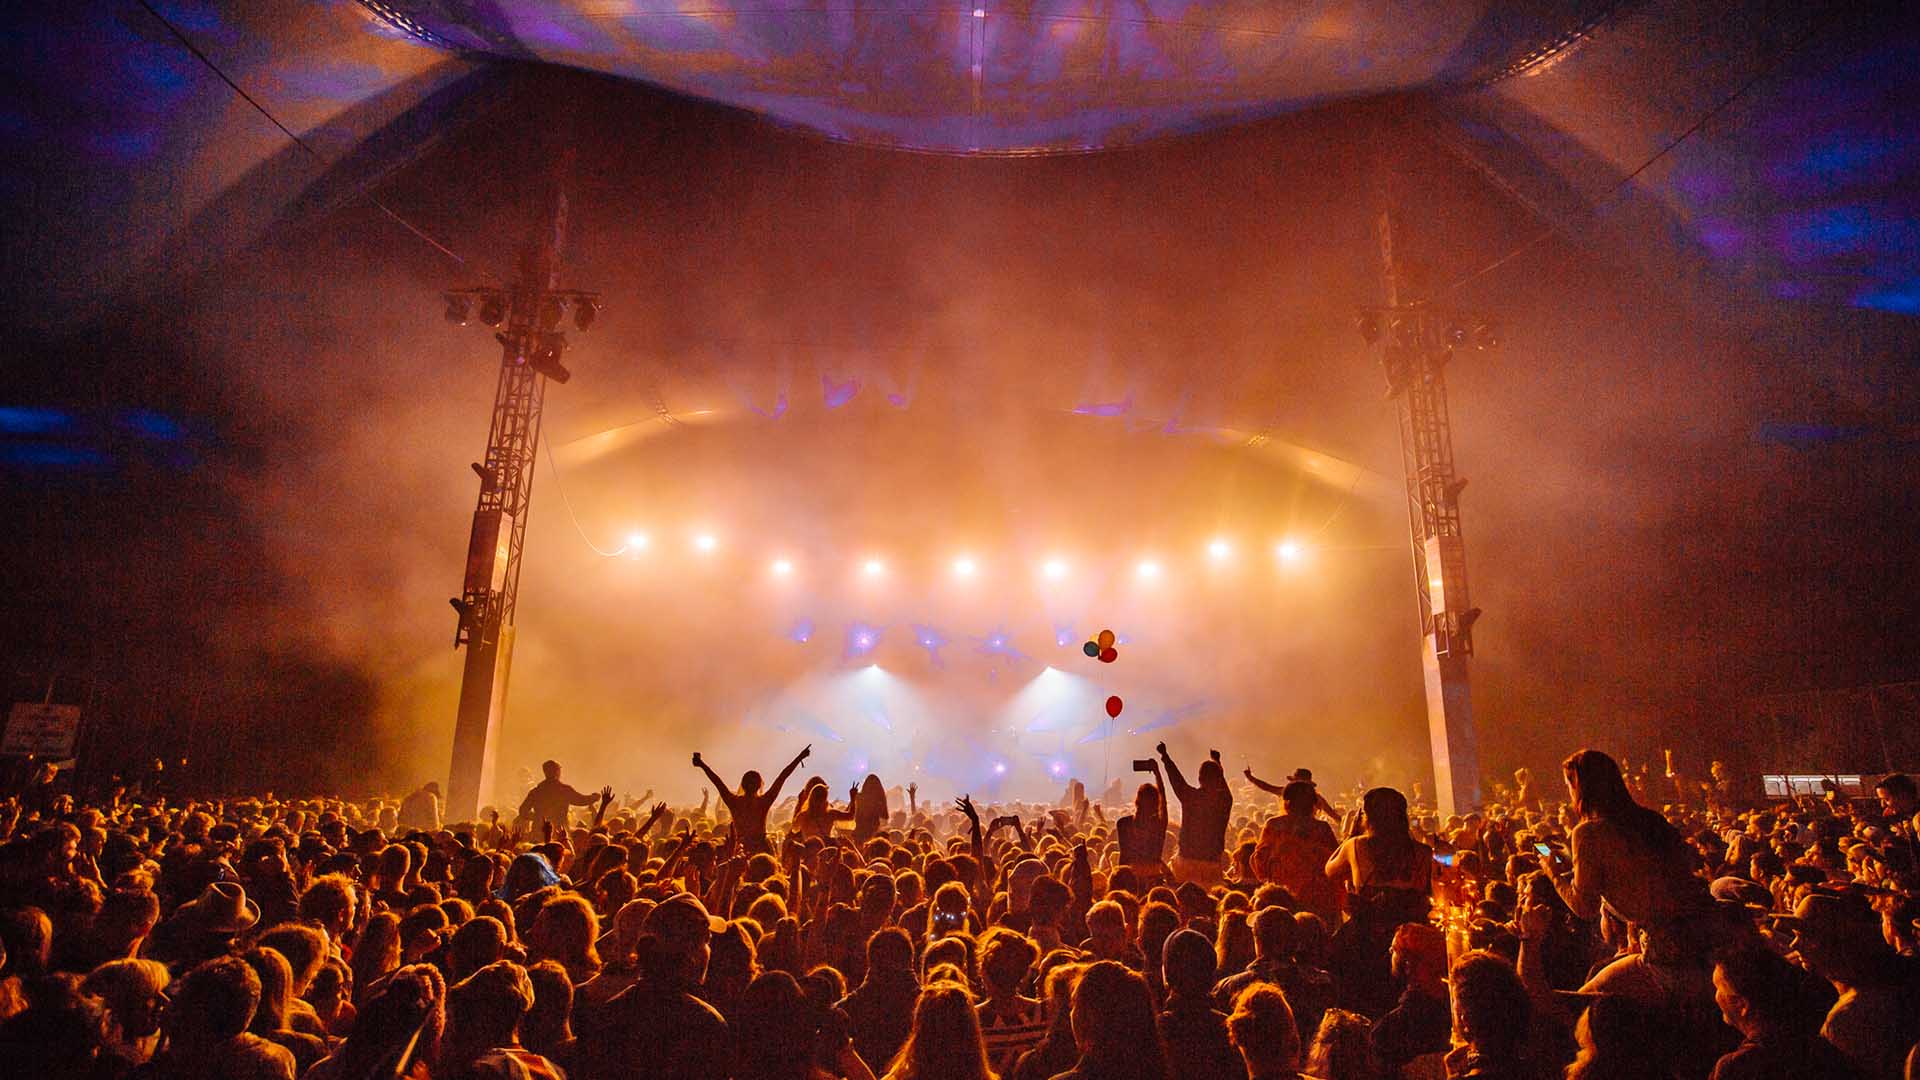 Splendour in the Grass Is Hosting a Virtual Festival So You Can Still Get Your Music Fix This Winter